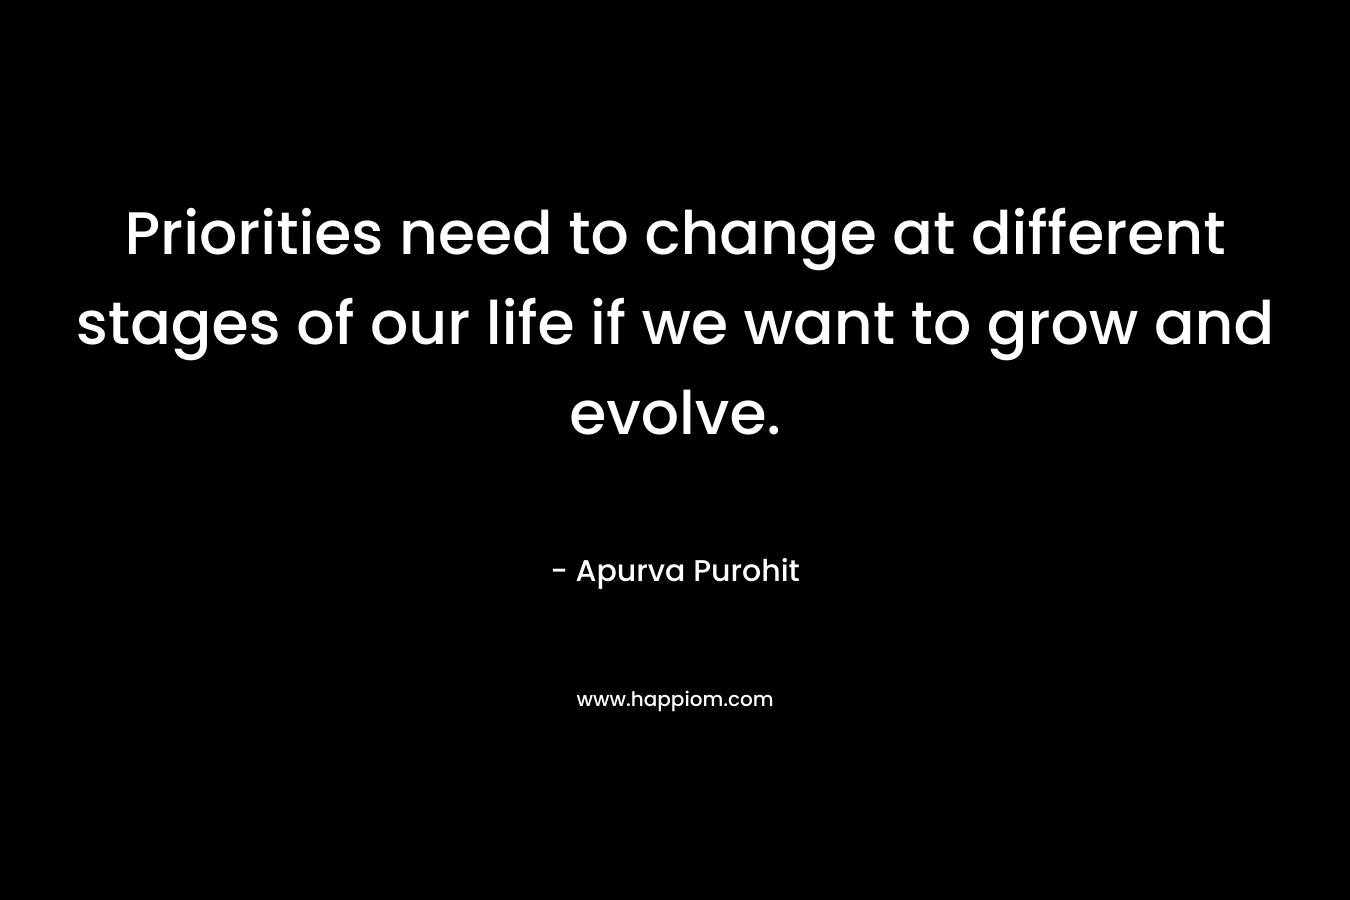 Priorities need to change at different stages of our life if we want to grow and evolve. – Apurva Purohit